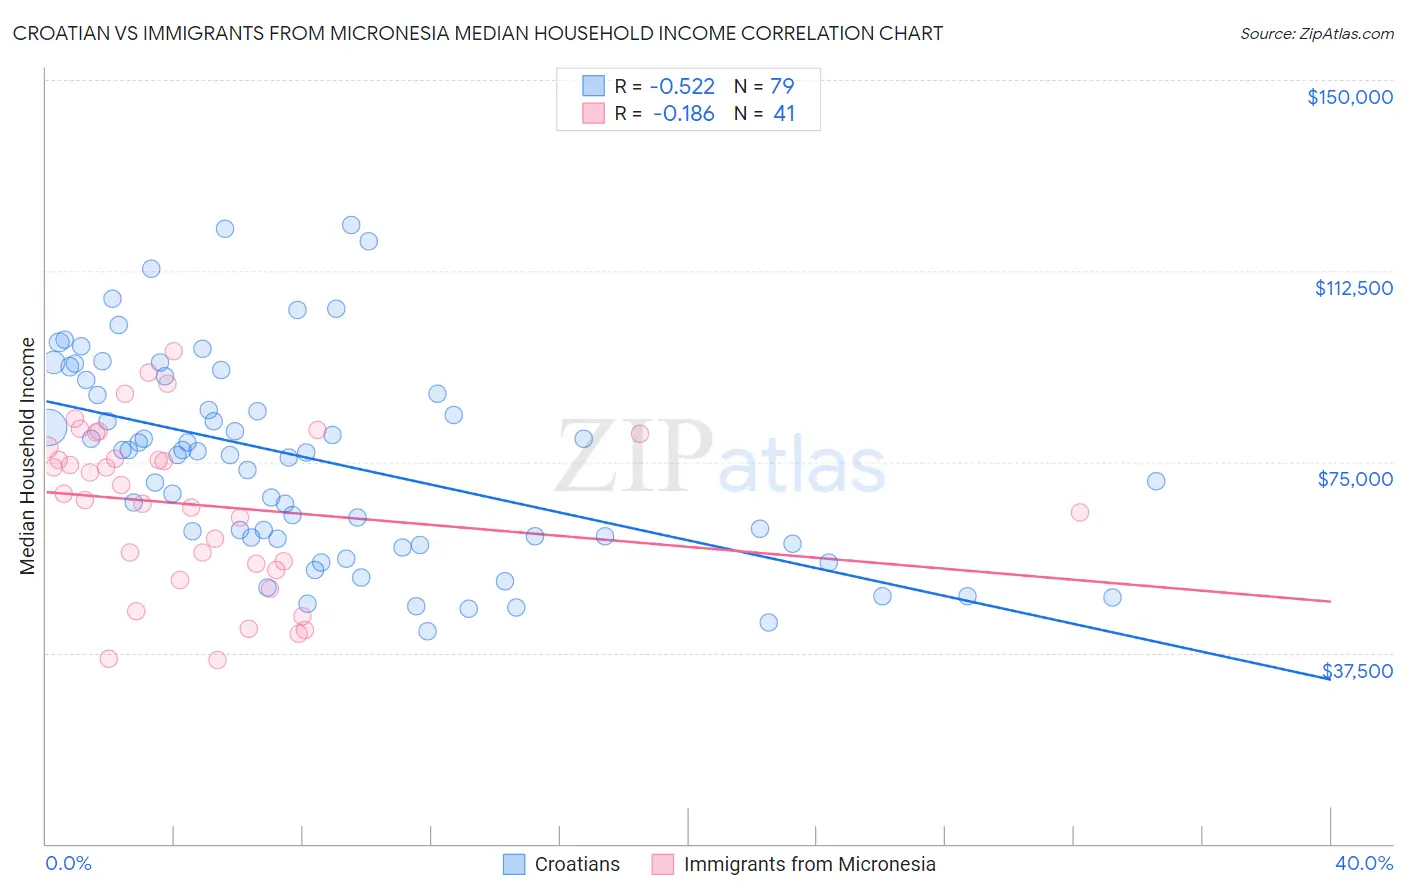 Croatian vs Immigrants from Micronesia Median Household Income